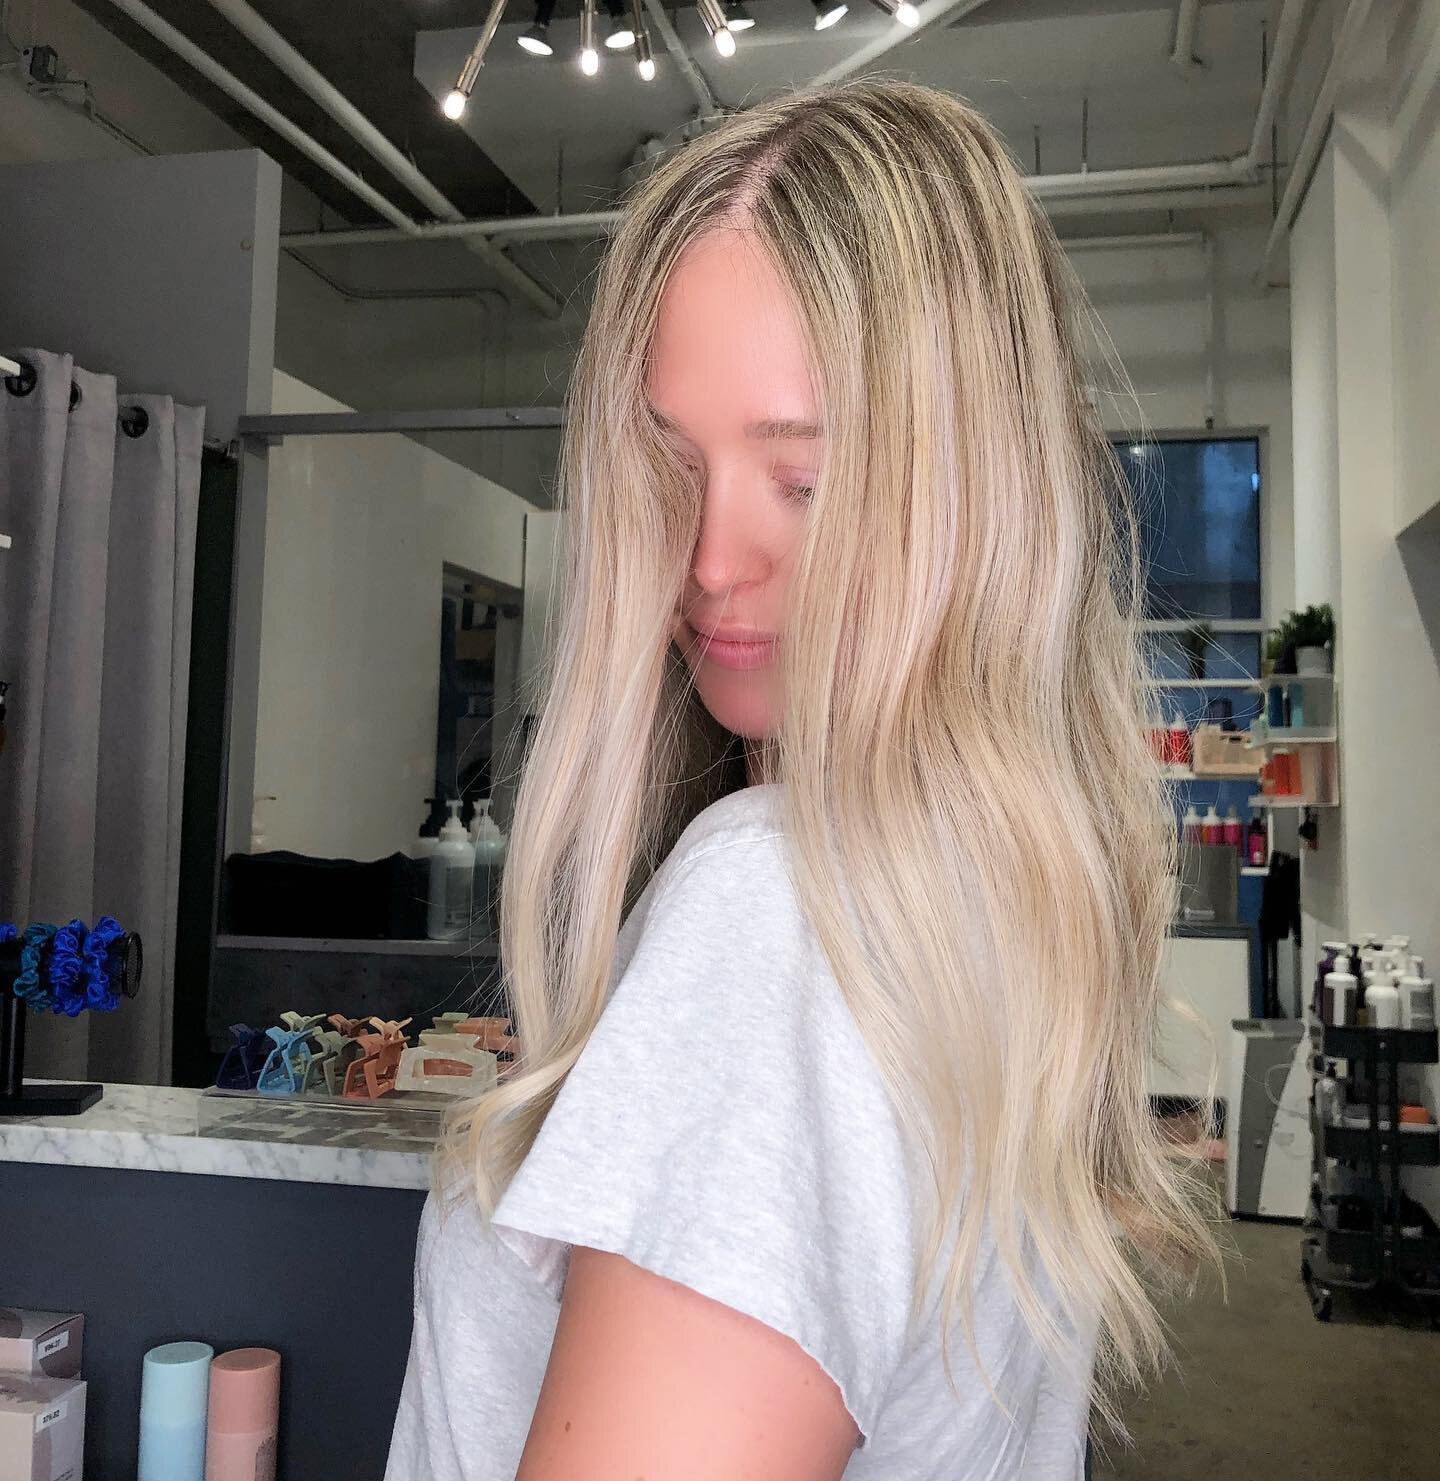 Blonde bombshell brought to you by alixarthurdesign.com. Booking link in bio. 💣 
&bull;
&bull;
&bull;
&bull;
#vancouverhairstylist #blonde #mastercolorist #vancouverblonde #vancouverbalayage